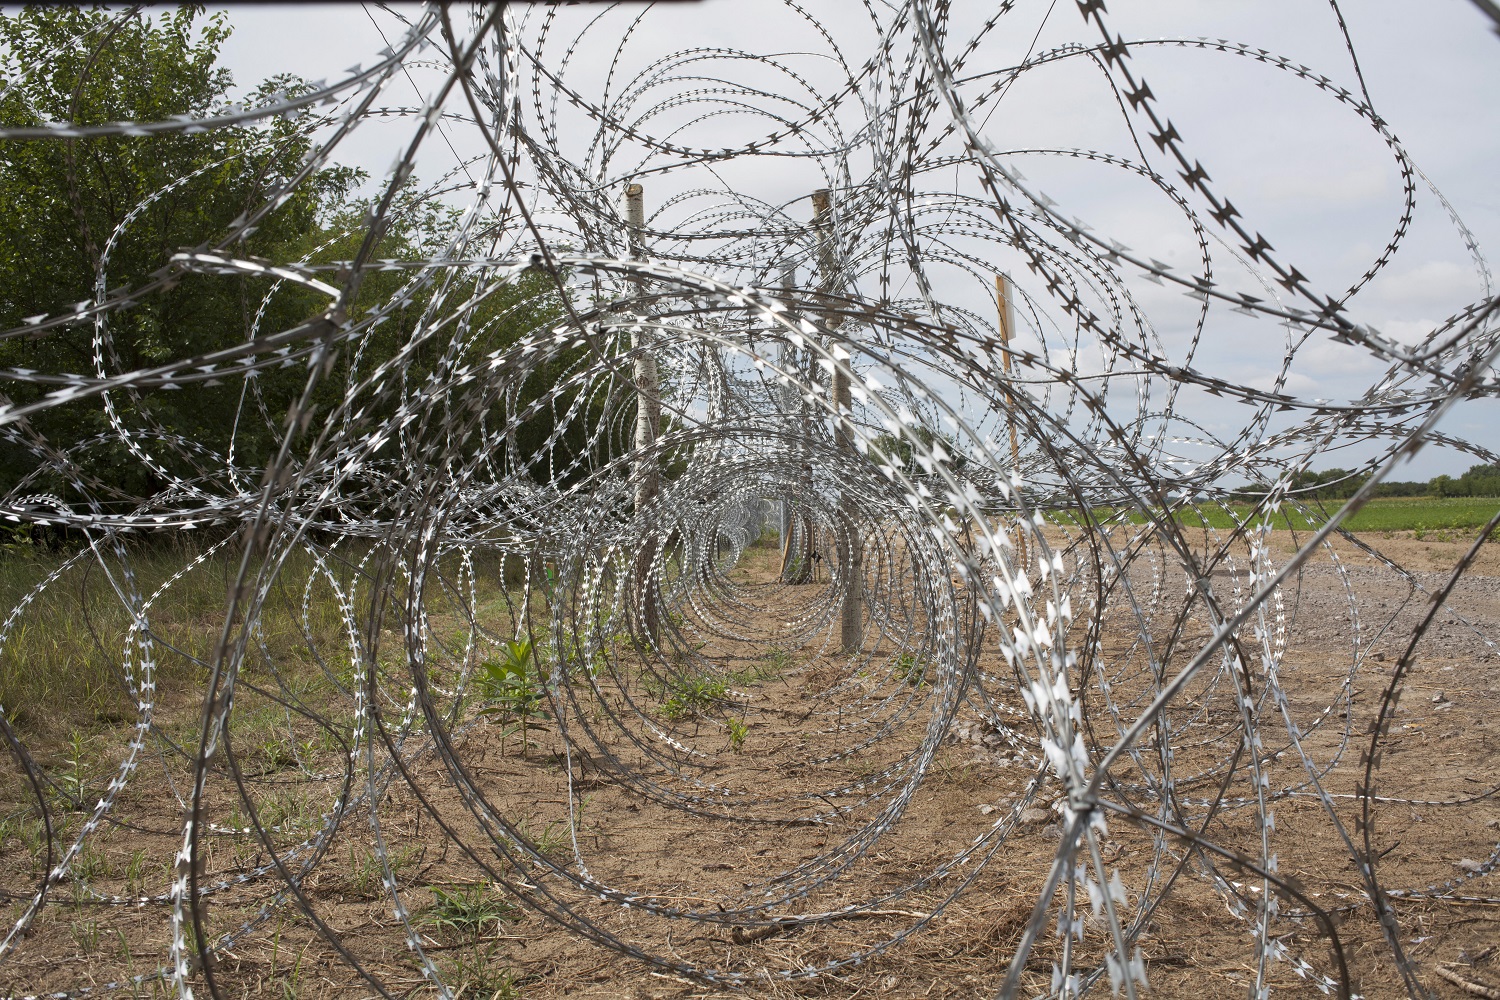 In pictures: The barbed wire fences that scar refugees and Europe | Middle East Eye